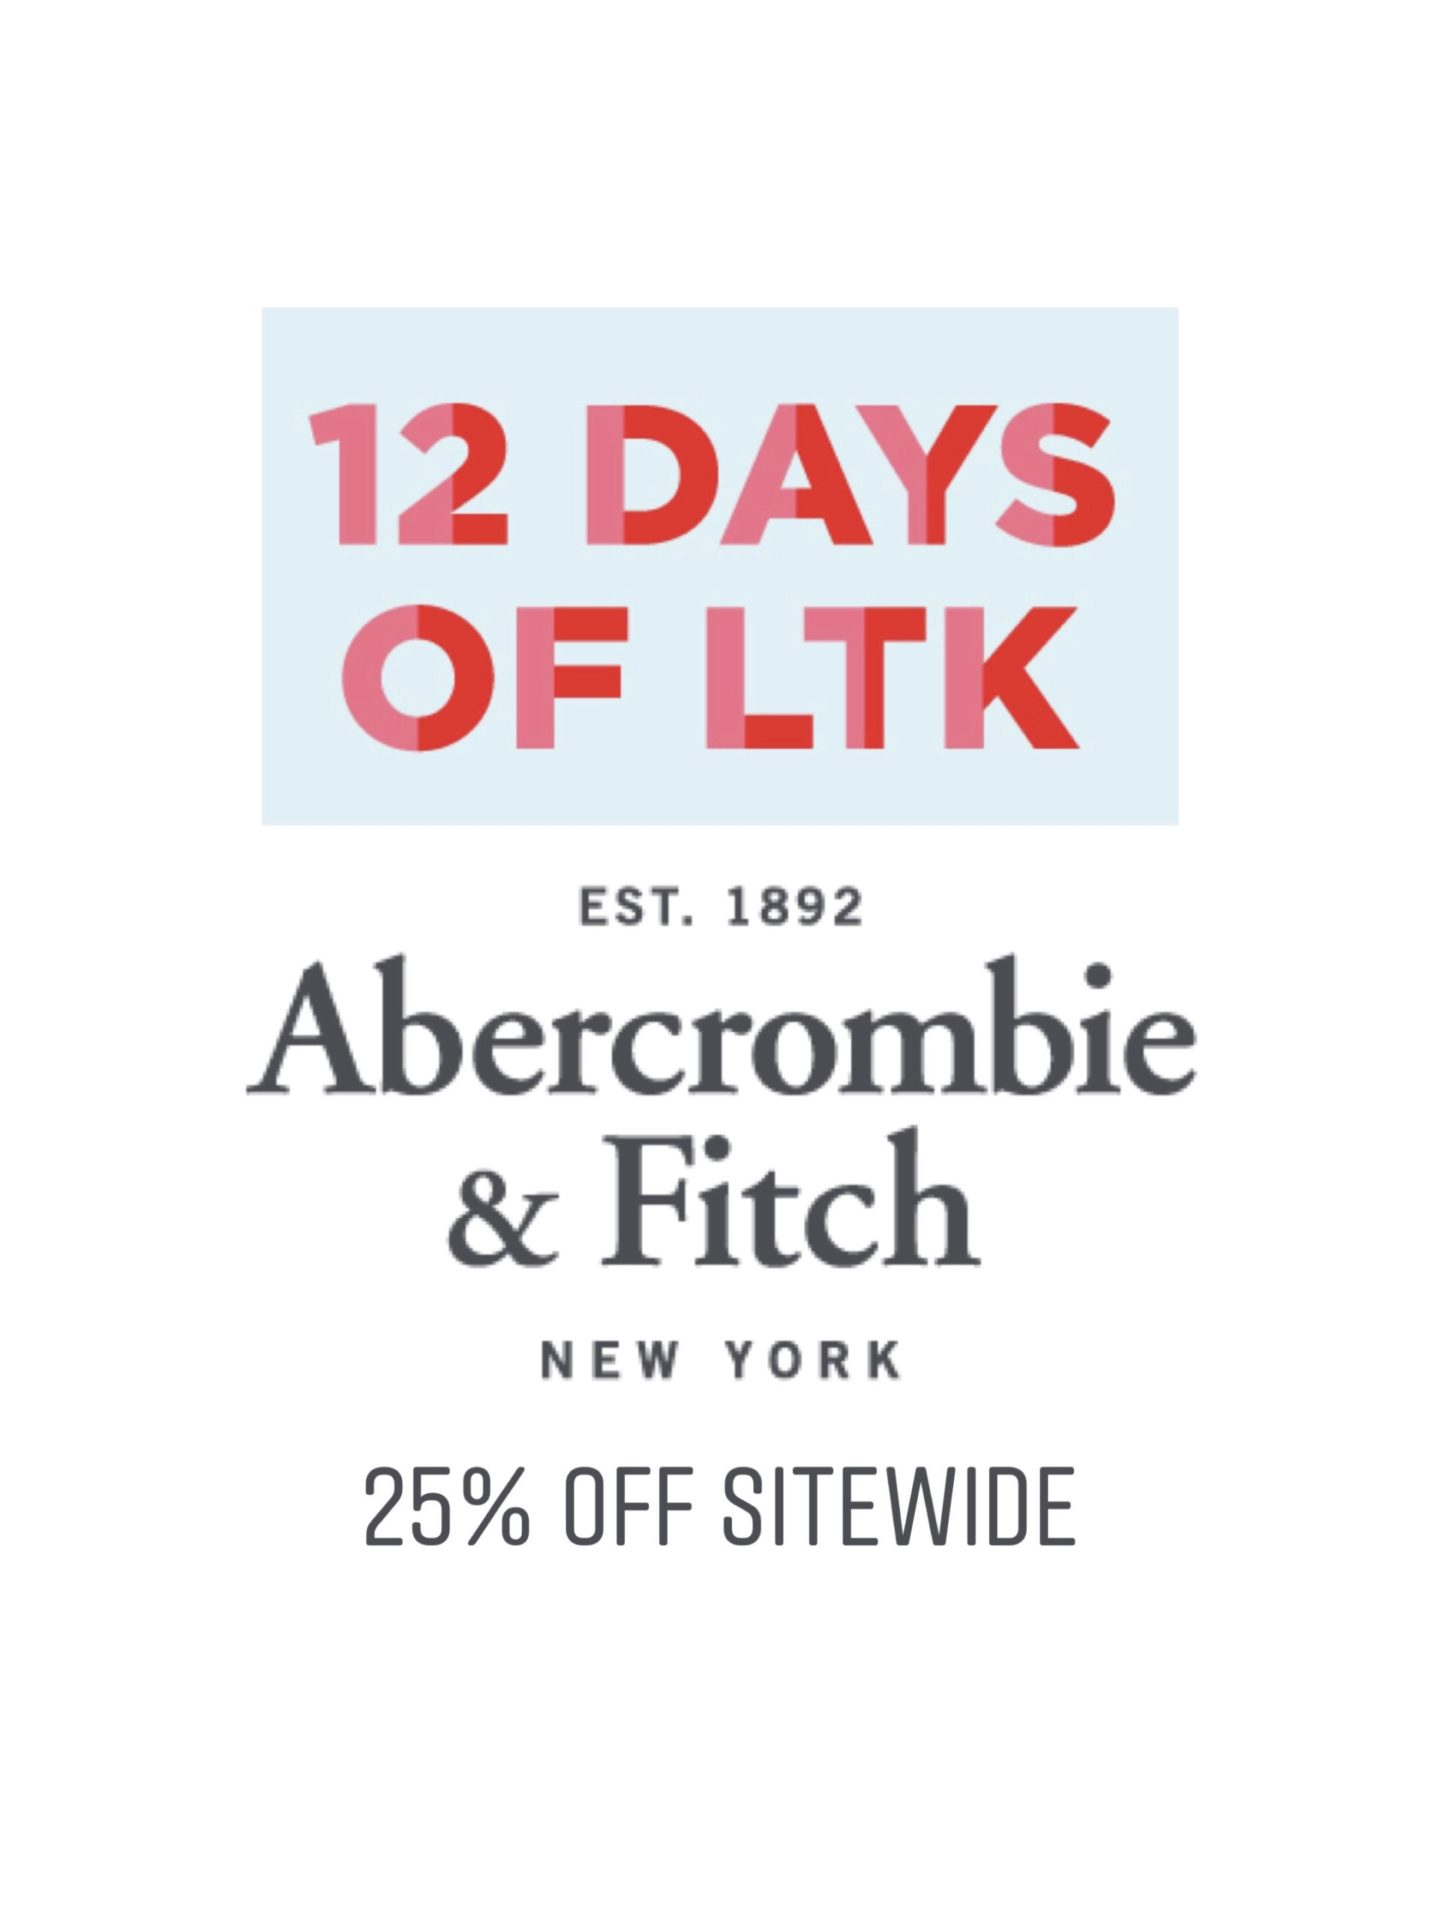 12 days of LTK Abercrombie & Fitch Sale 25 off! (75 on select